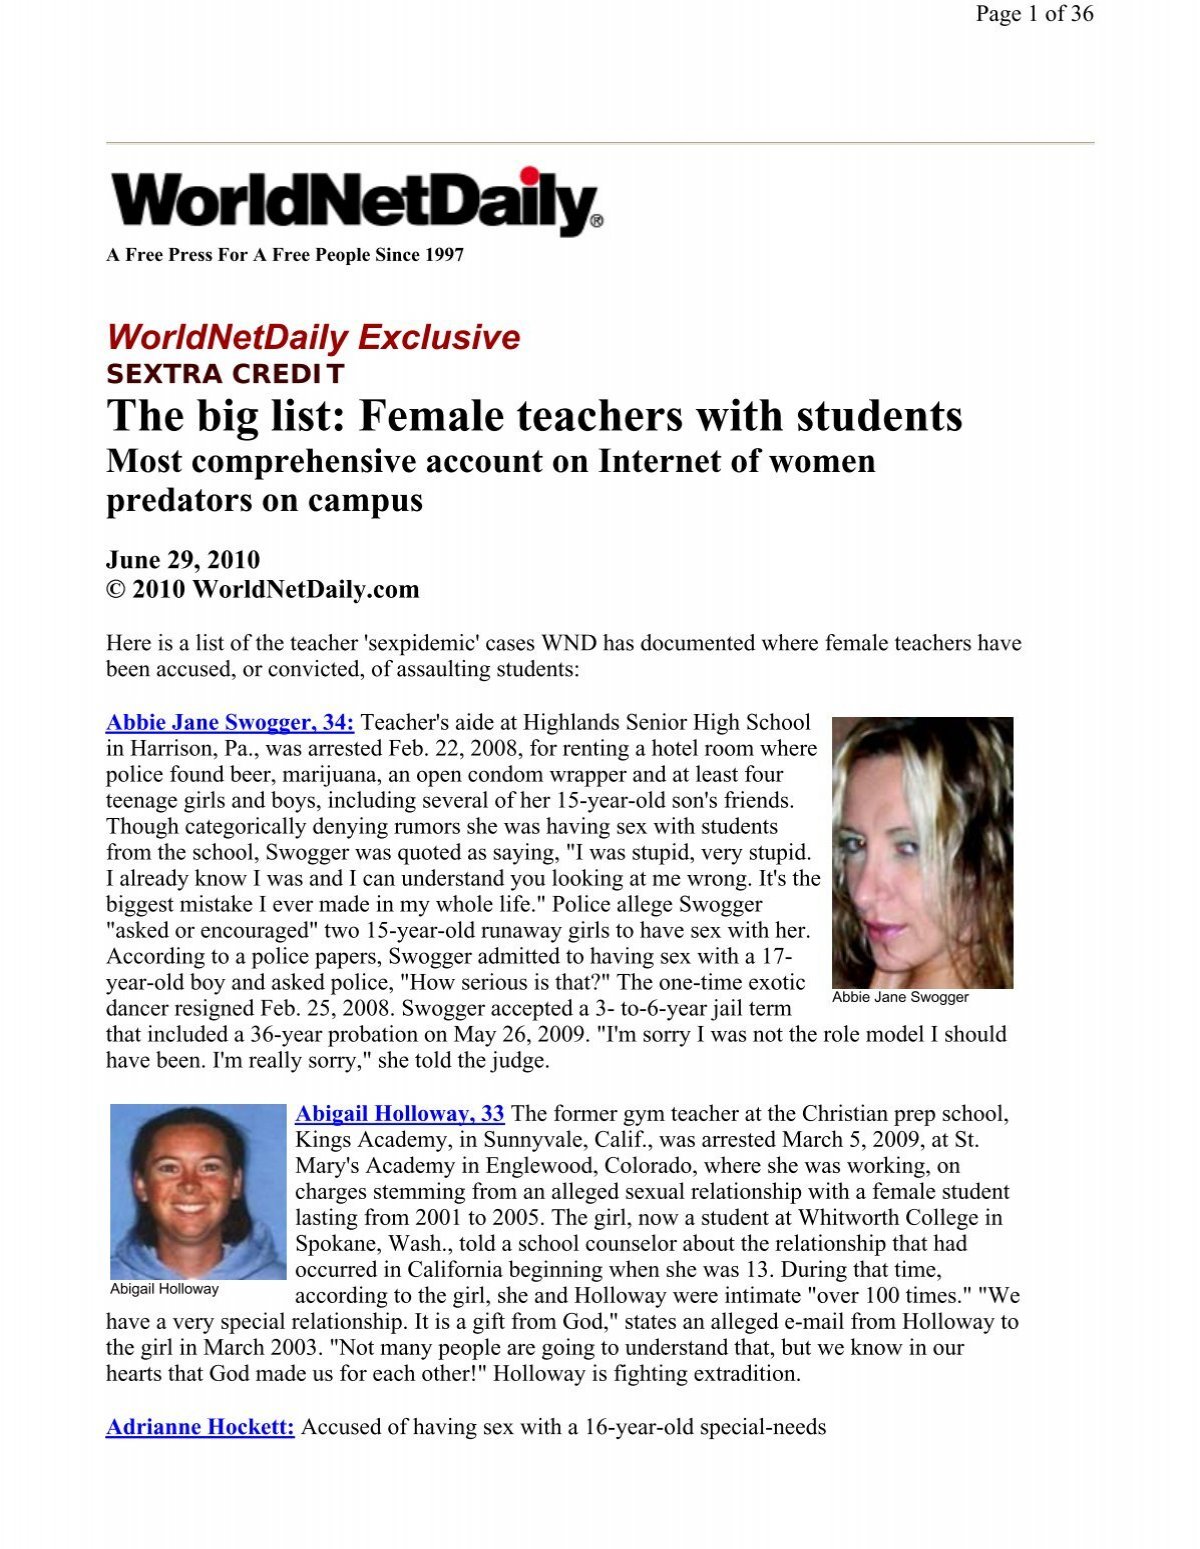 The big list: Female teachers with students